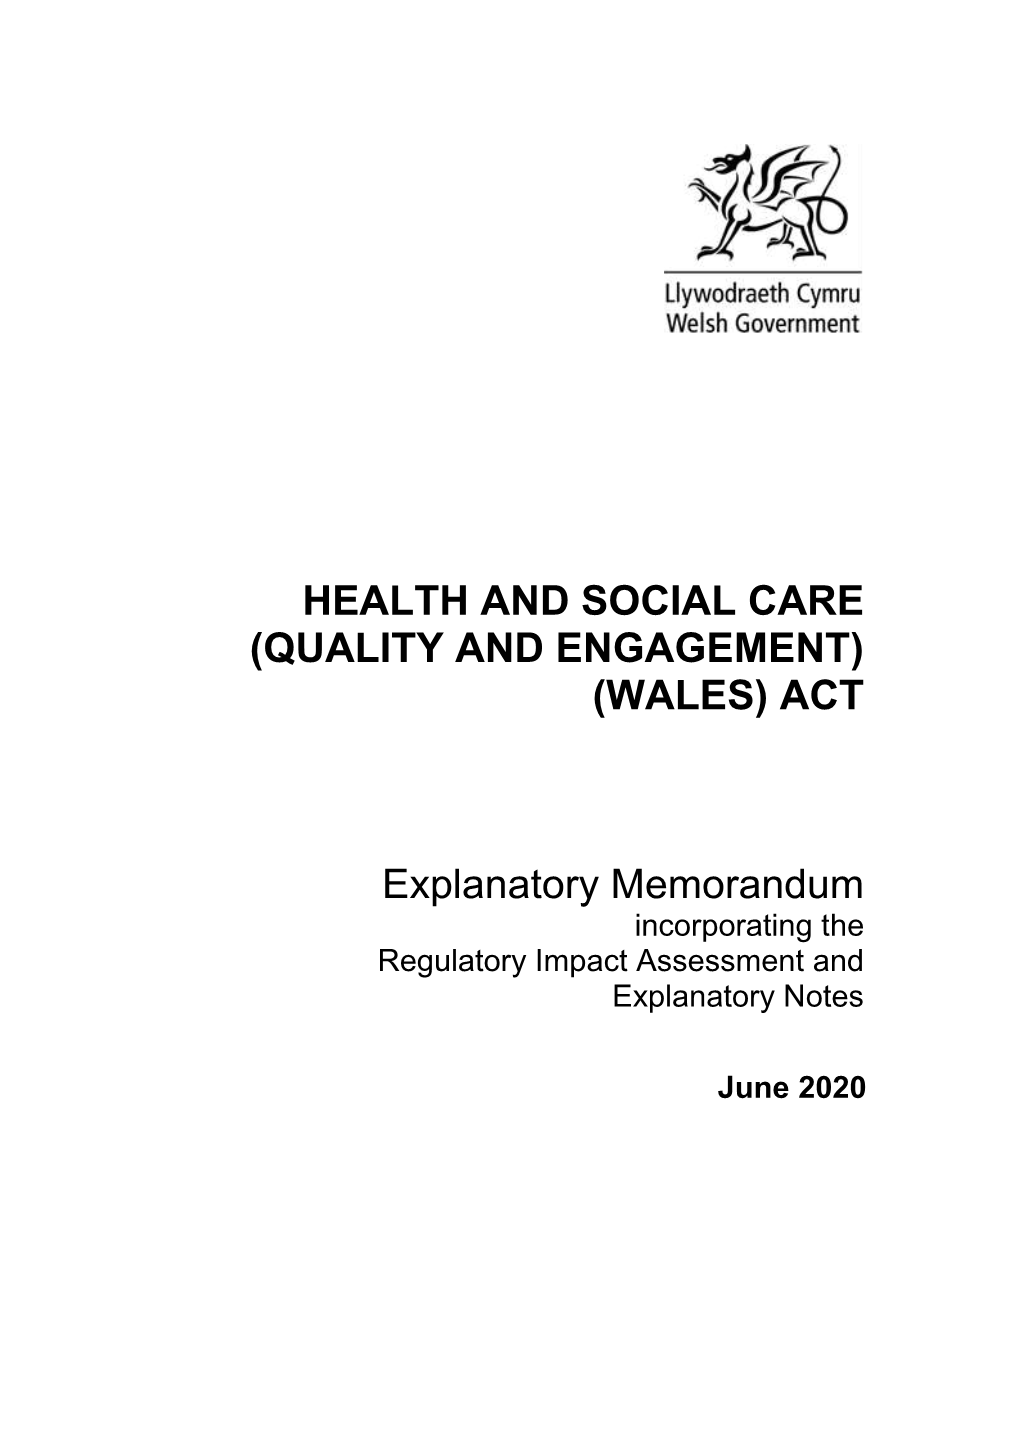 Health and Social Care (Quality and Engagement) (Wales) Act